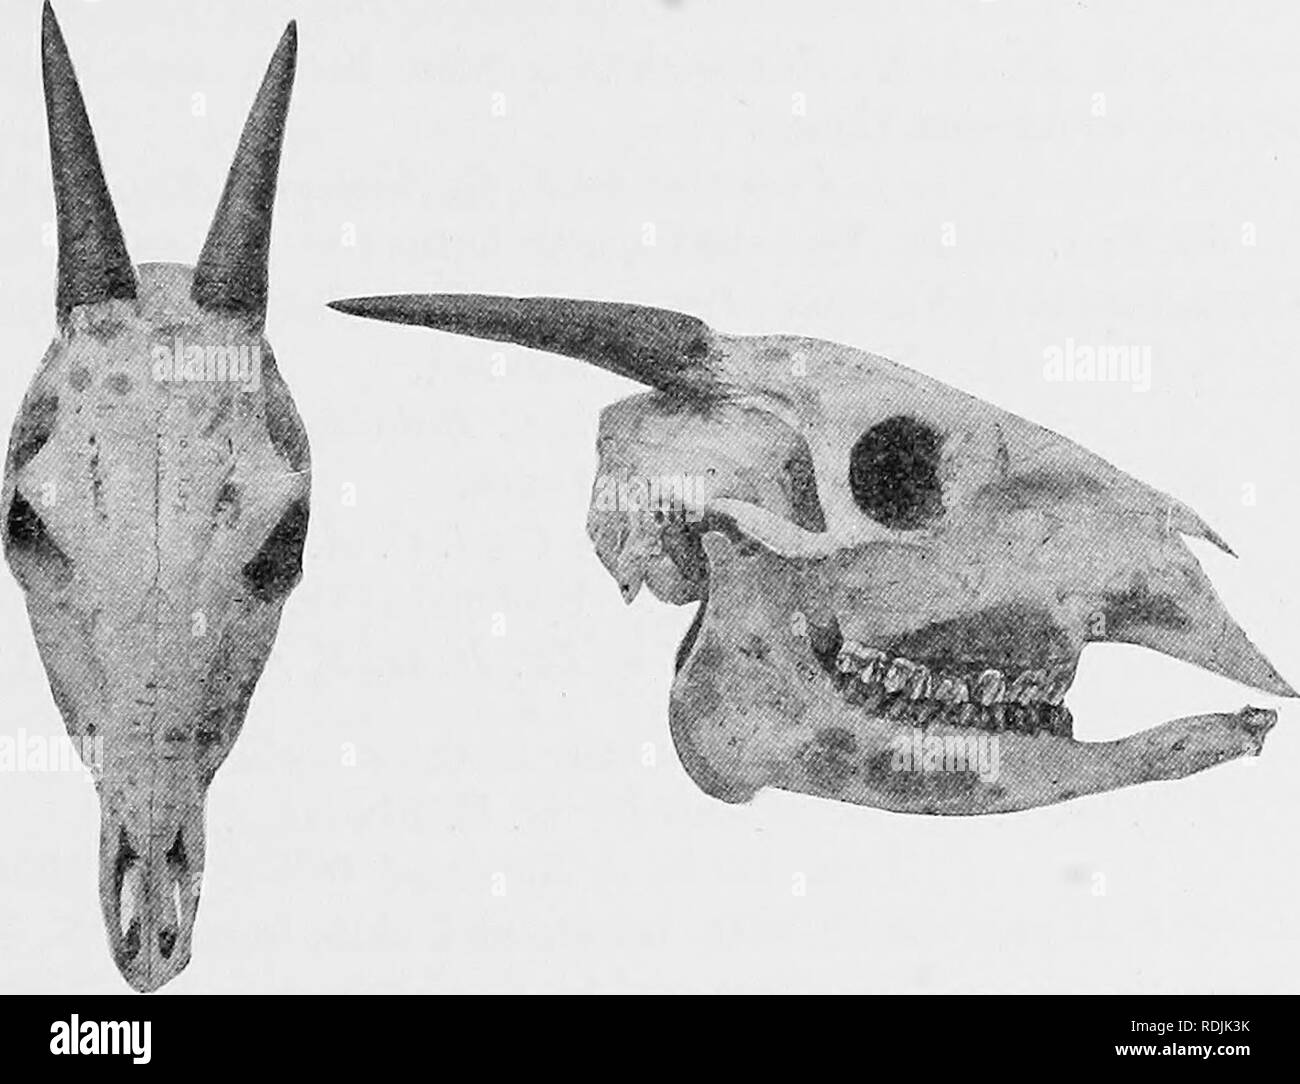 . Catalogue of the ungulate mammals in the British Museum (Natural History). Ungulates. CEPIIALOPHINiE 65 specimens grow to 6^ inches in length, rehxtively large, divergent, slender, evenly tapering, and somewhat roughened at base. Skull relatively slight, slender, and long, with median palatal notch in advance of lateral ones; basal length lOj, maximum width 4|-, interval between muzzle and orbit 6^ inches. The range extends from the west coast through the forest-zone to N. E. Ehodesia. The characters given by their describers as respectively distinctive of the N. E. Ehodesian. Pig. 10.—Front Stock Photo